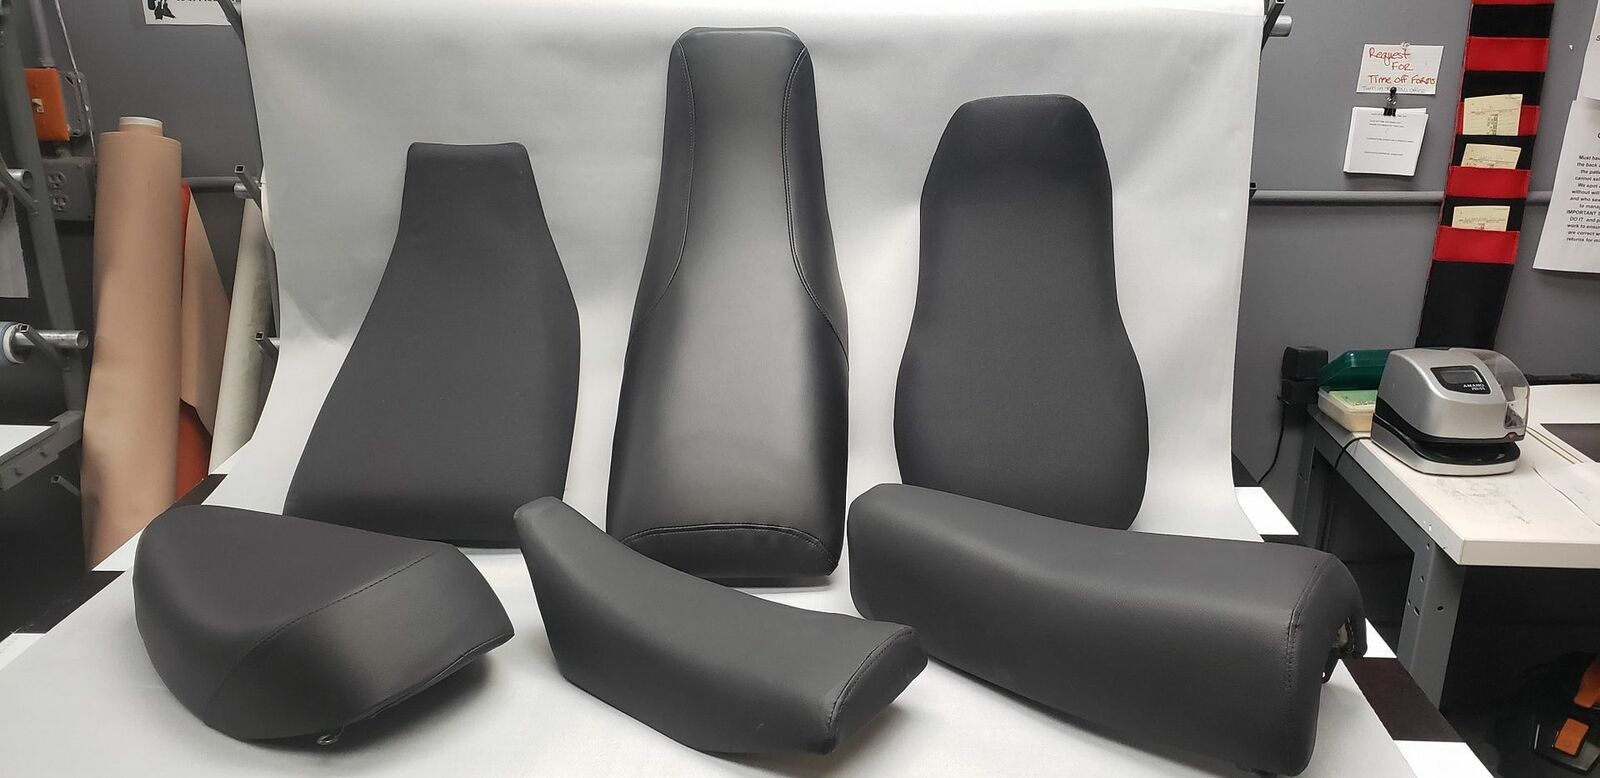 Honda CB 72 HAWK 250 Seat Cover For 1961 To 1966 Models - $41.99